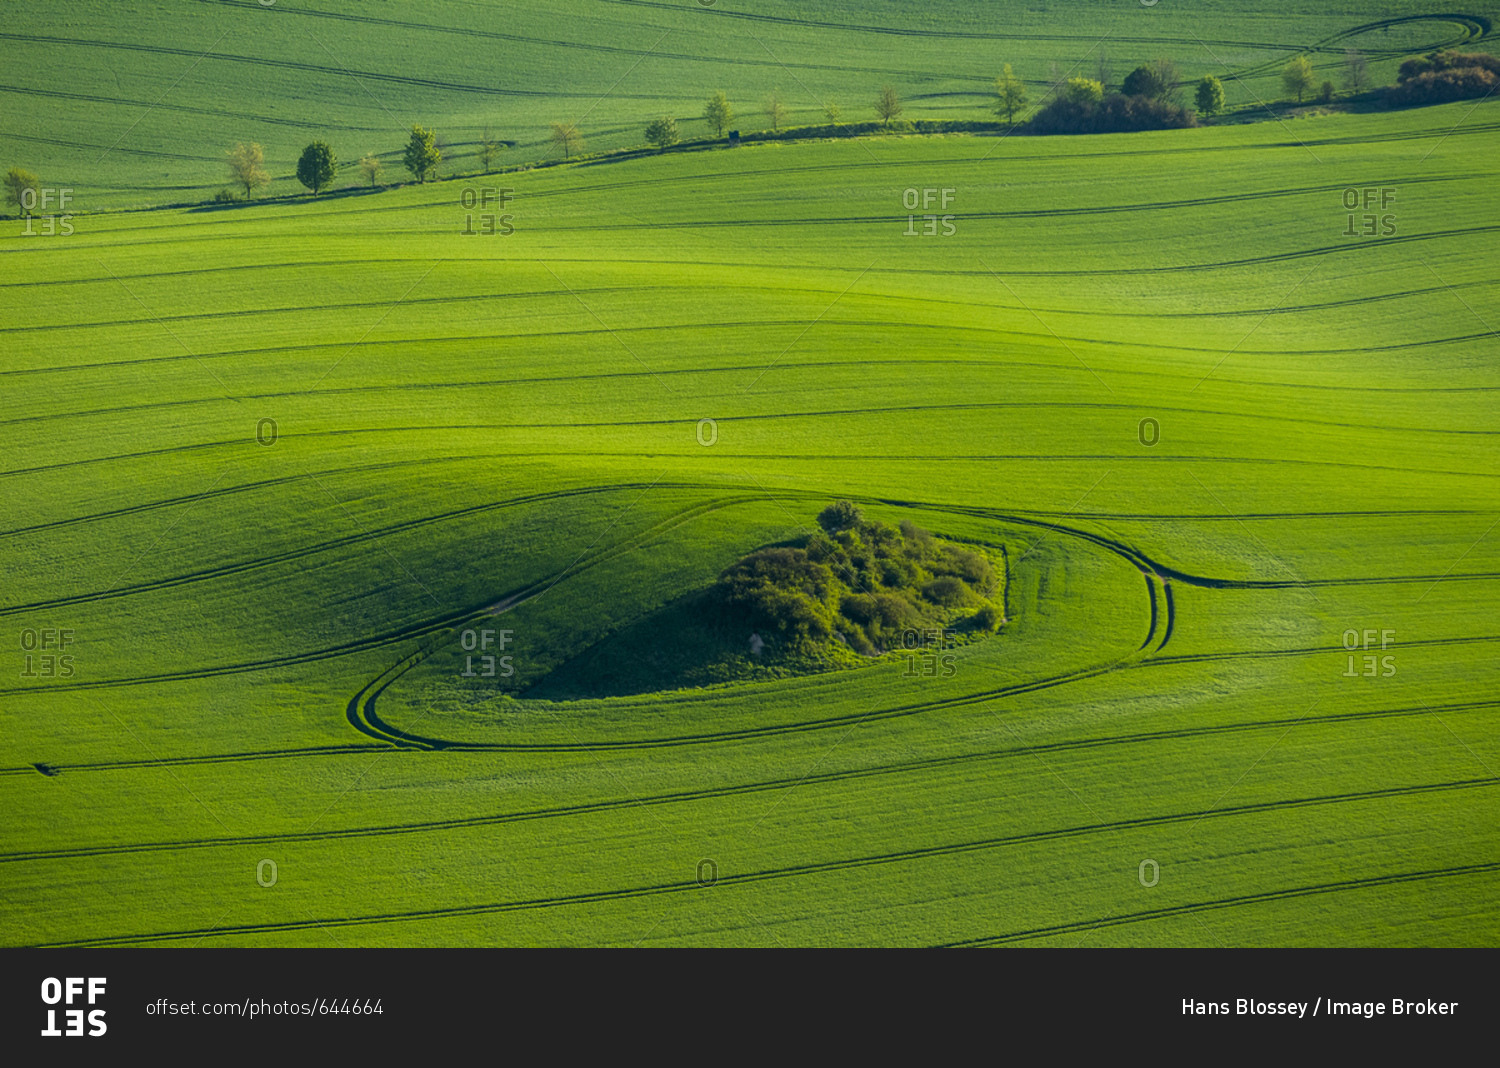 Spring sowing, green field in a moraine landscape with a hedge area, Gross Roge, Mecklenburg-Western Pomerania, Germany, Europe